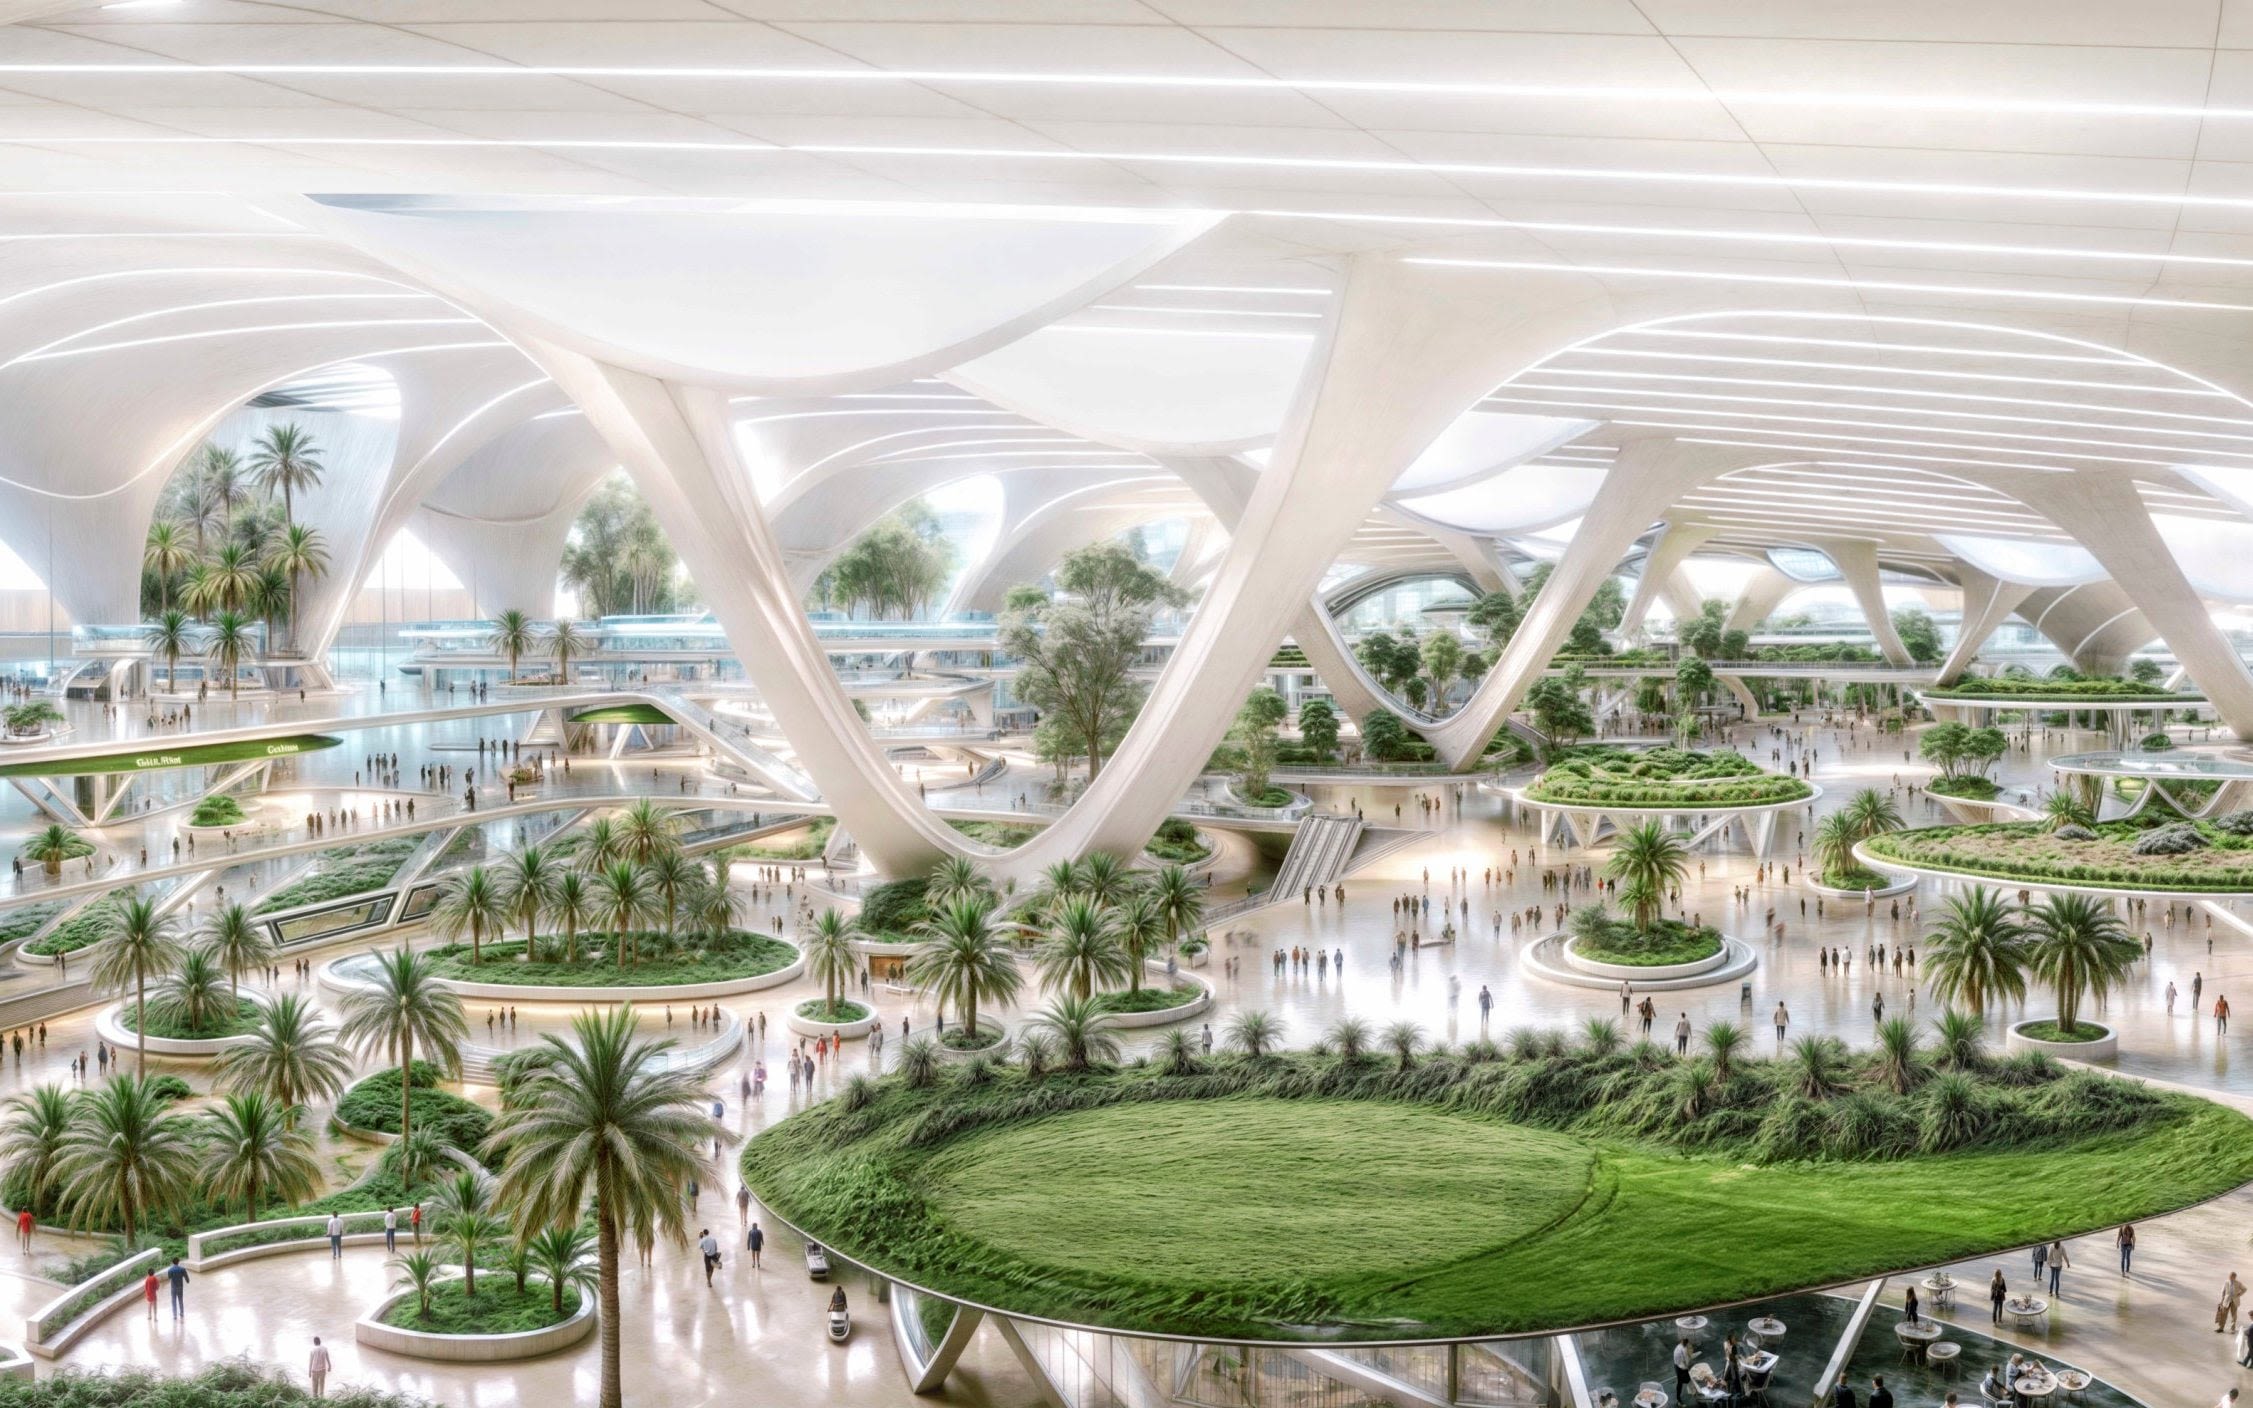 While Europe pursues net zero, mega-airports are being built in deserts